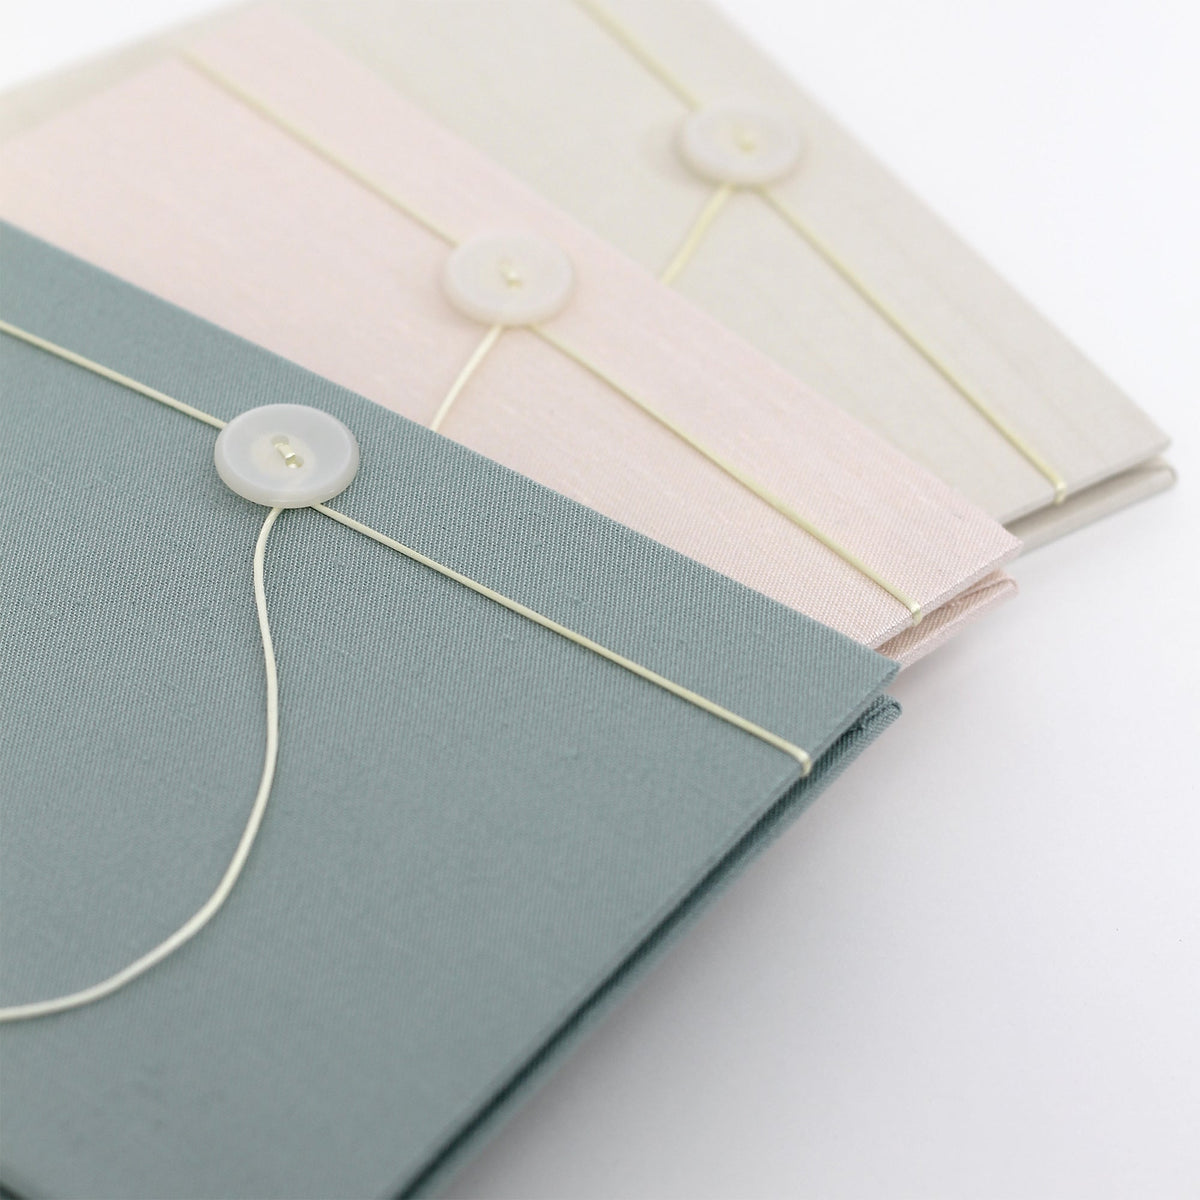 Accordion Book | Cover: Emerald Silk | Available Personalized